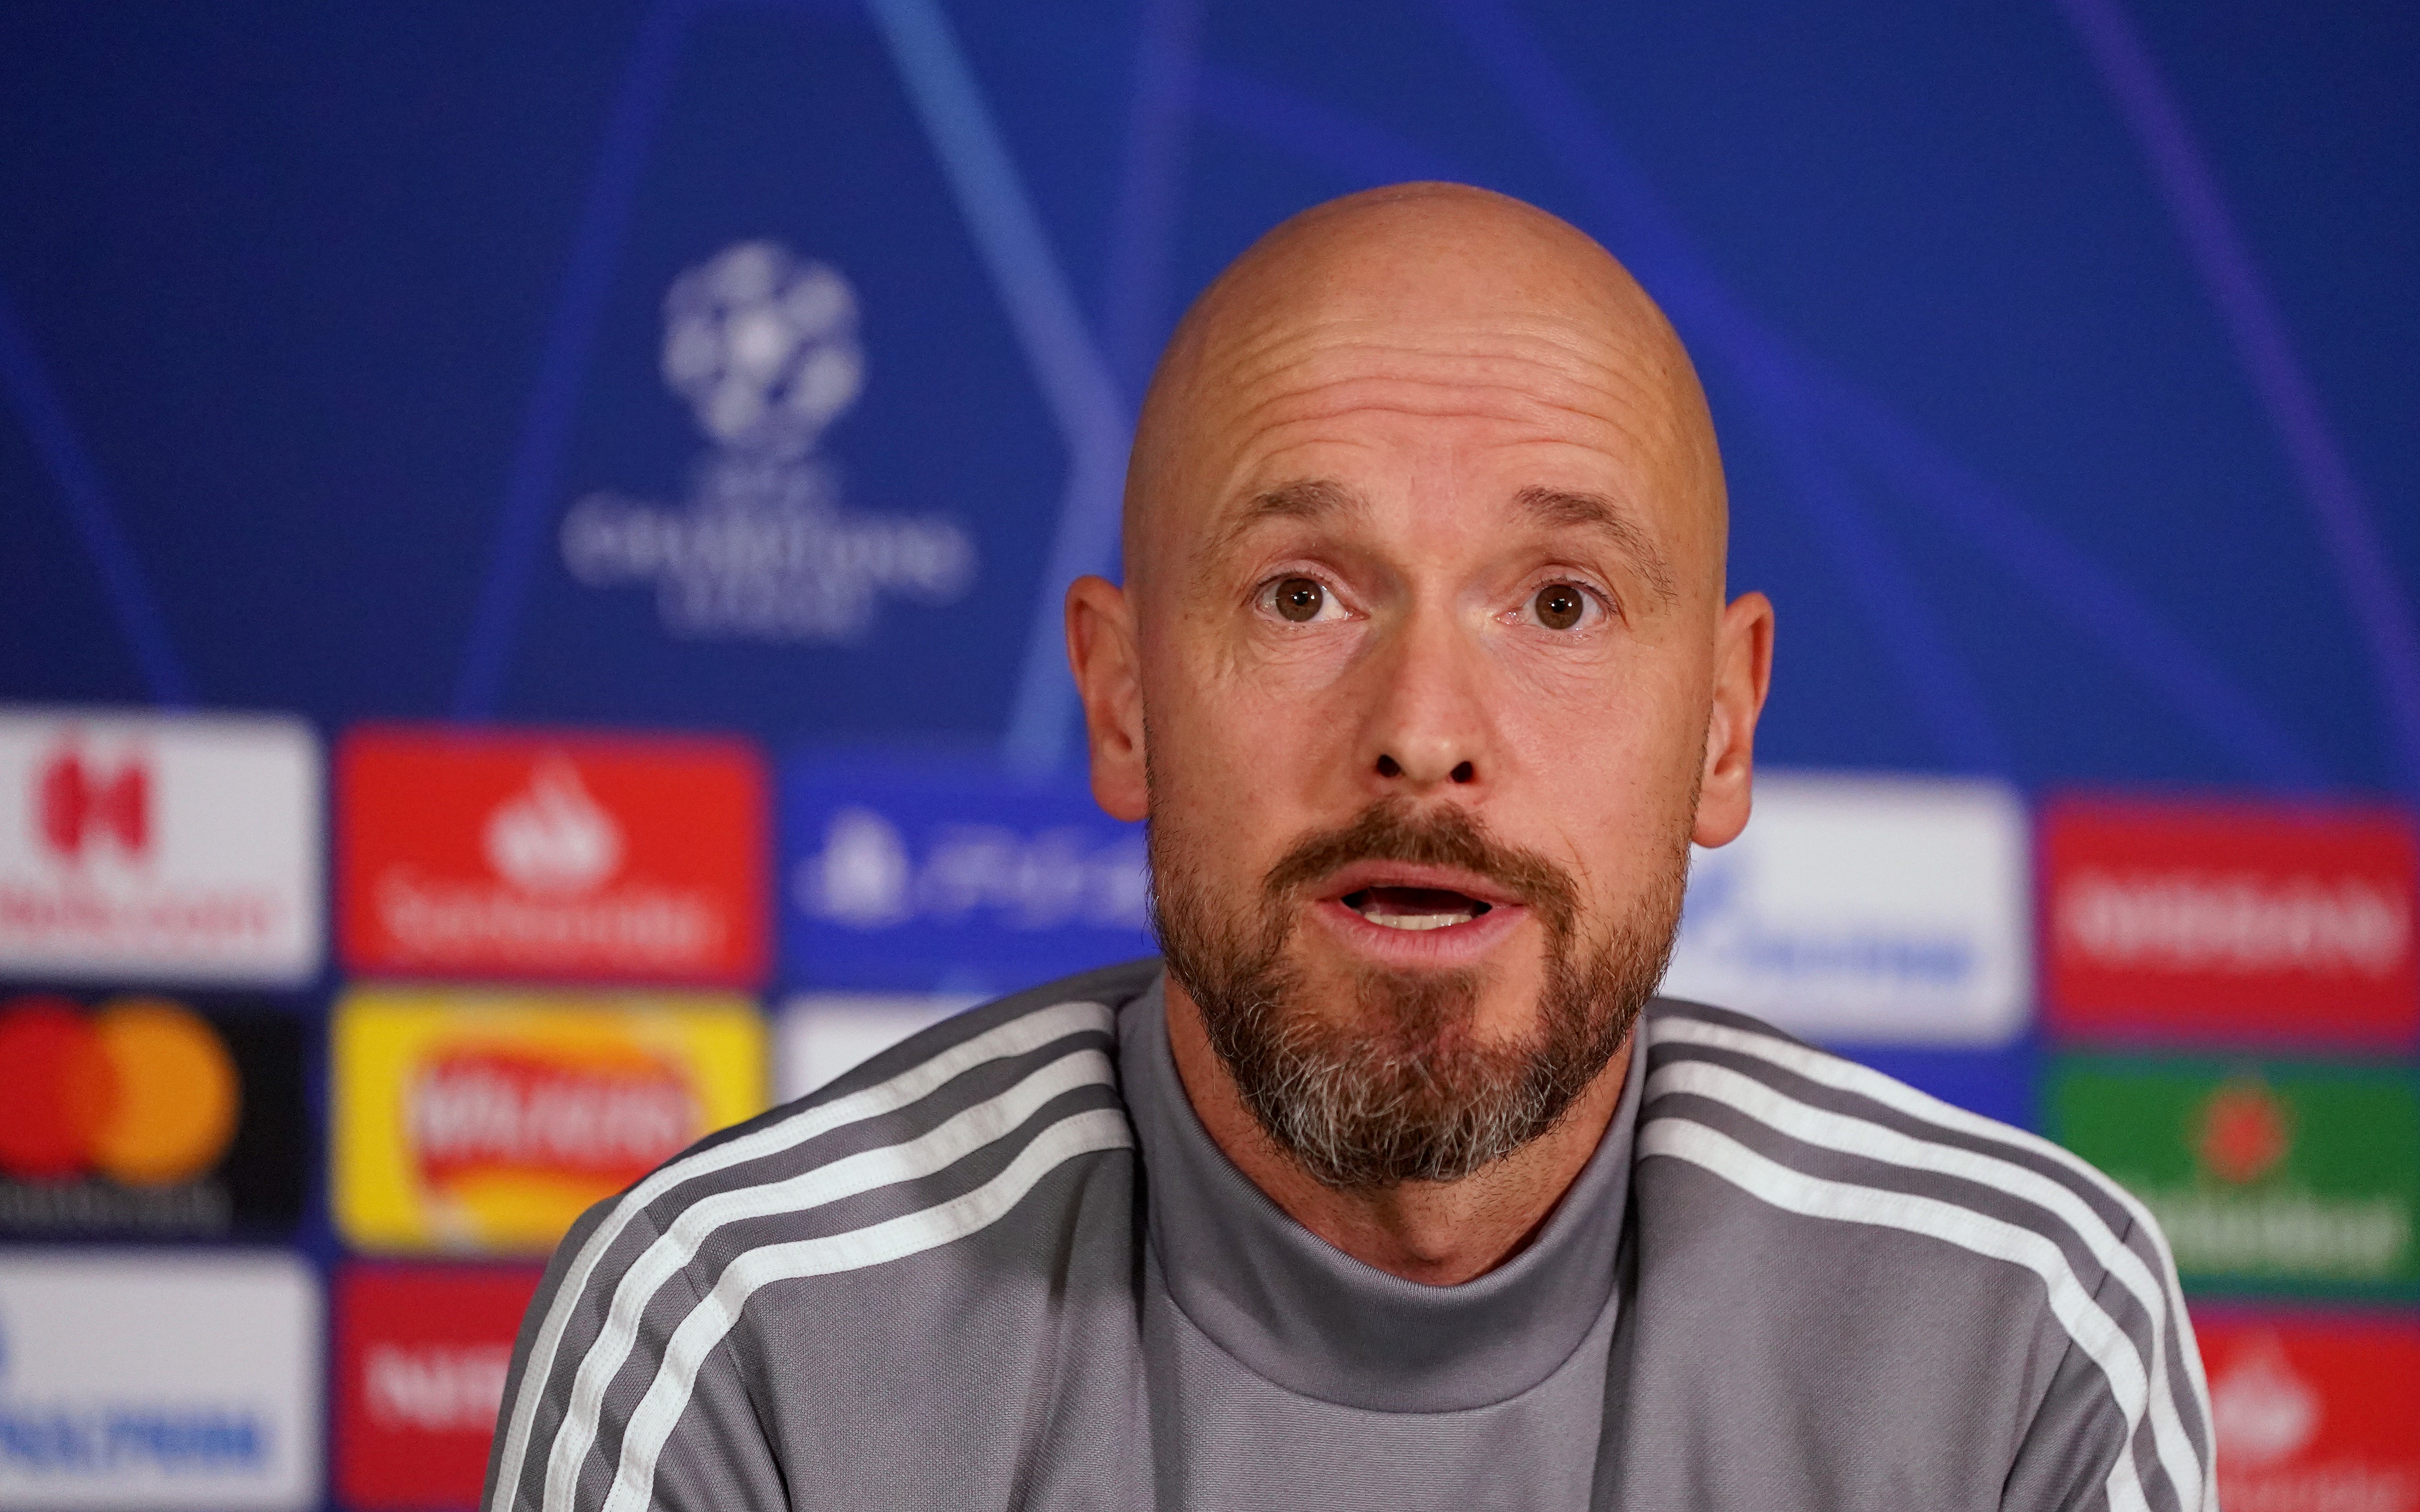 Erik Ten Hag is tipped to become the new manager of Manchester United (Tess Derry/PA)